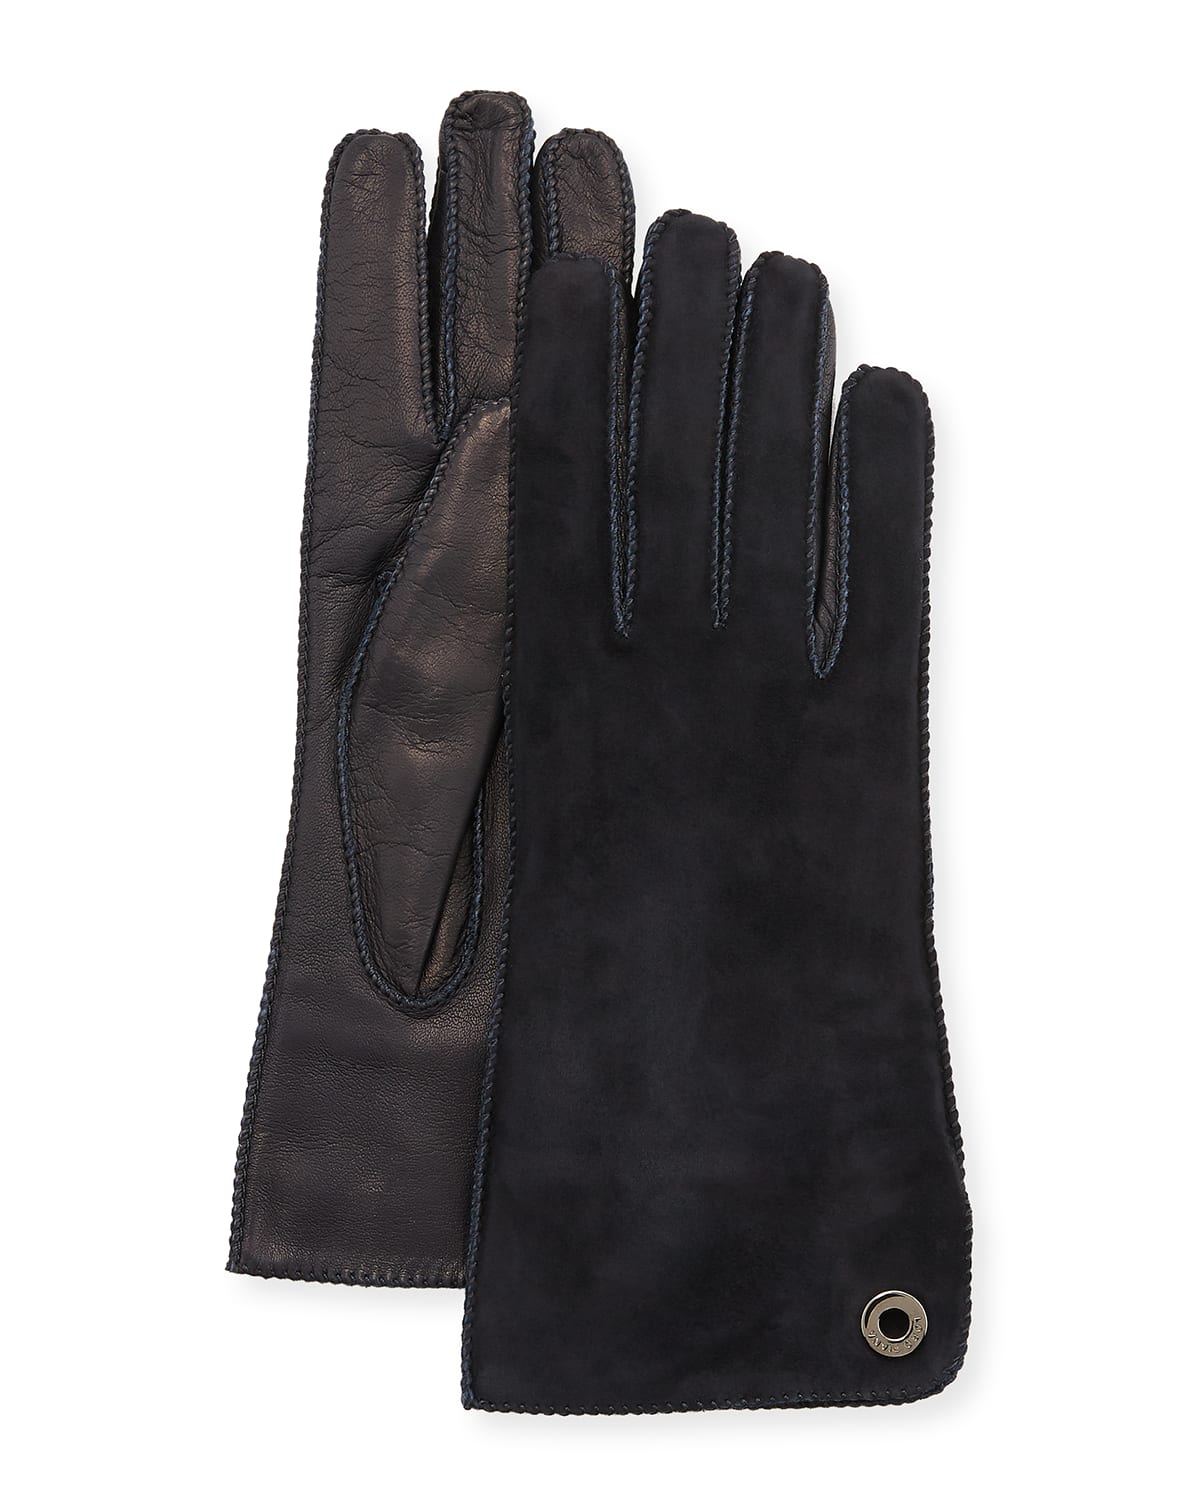 Loro Piana Jacqueline Suede And Leather Gloves In Medium Grey